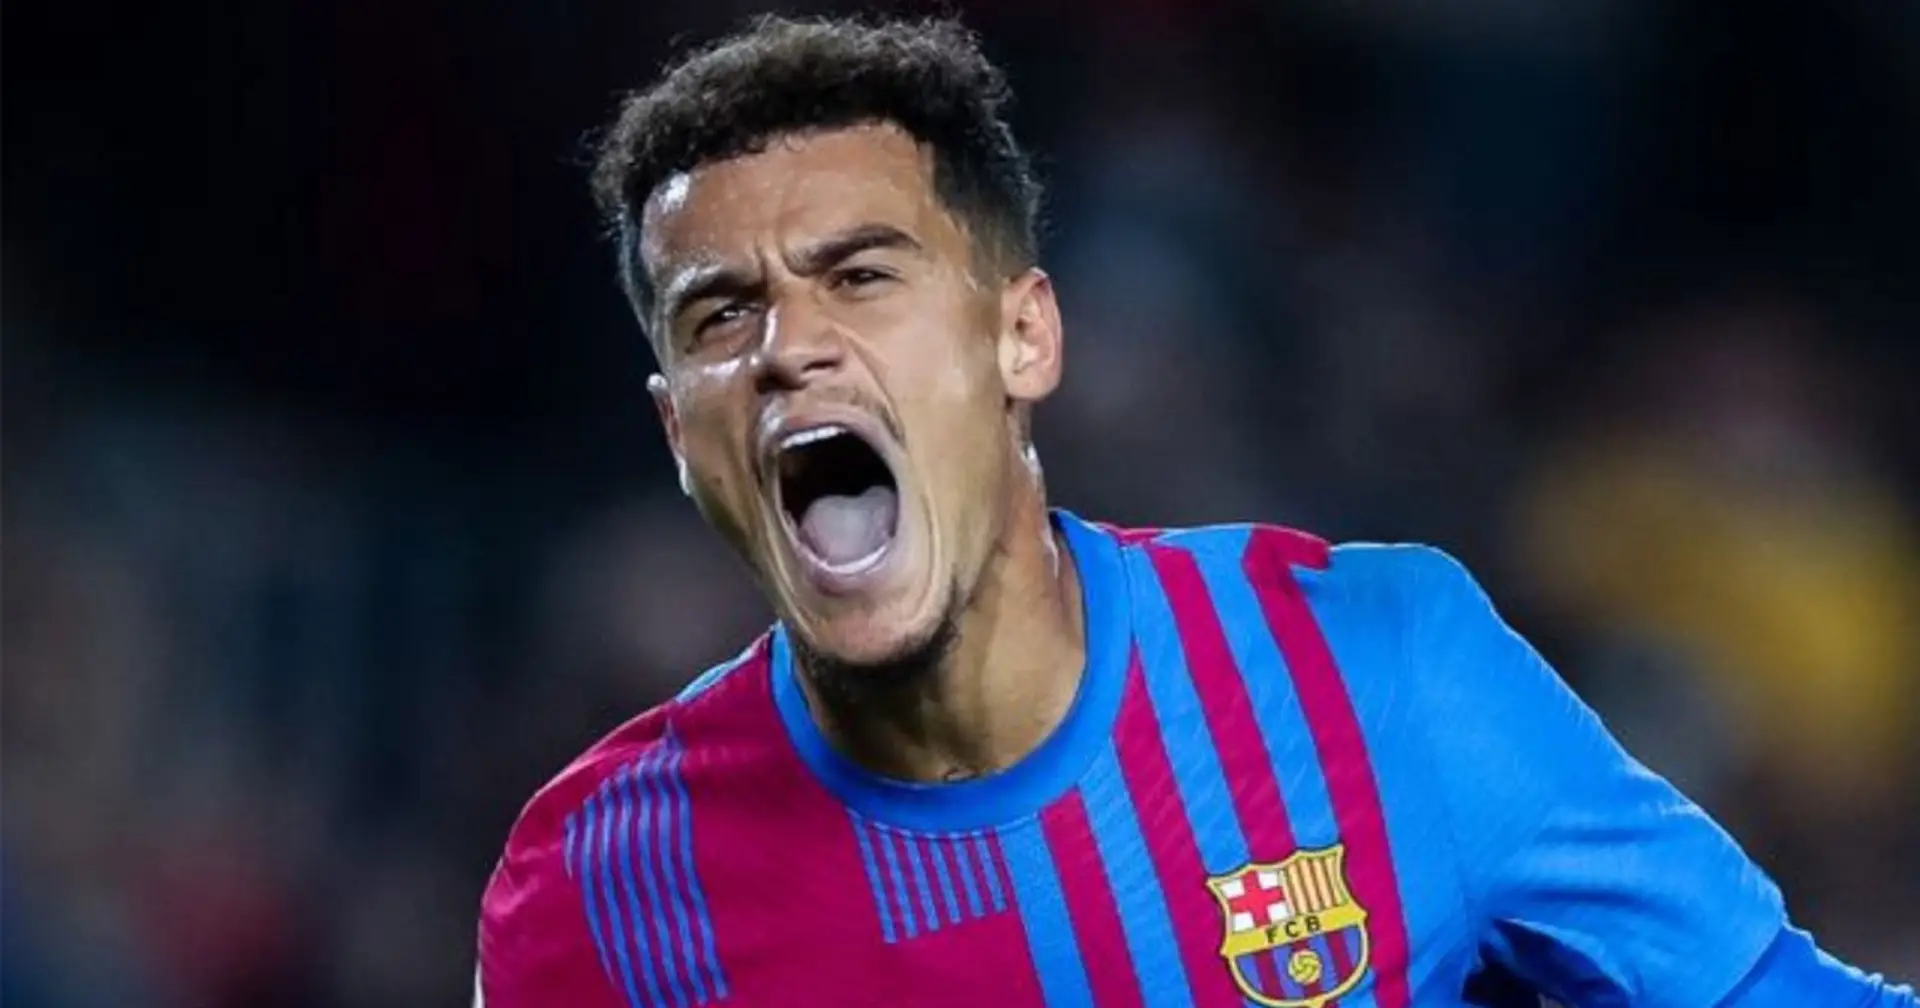 Barca deny they have to pay Liverpool €20m when Coutinho makes 100th appearance (reliability: 4 stars)